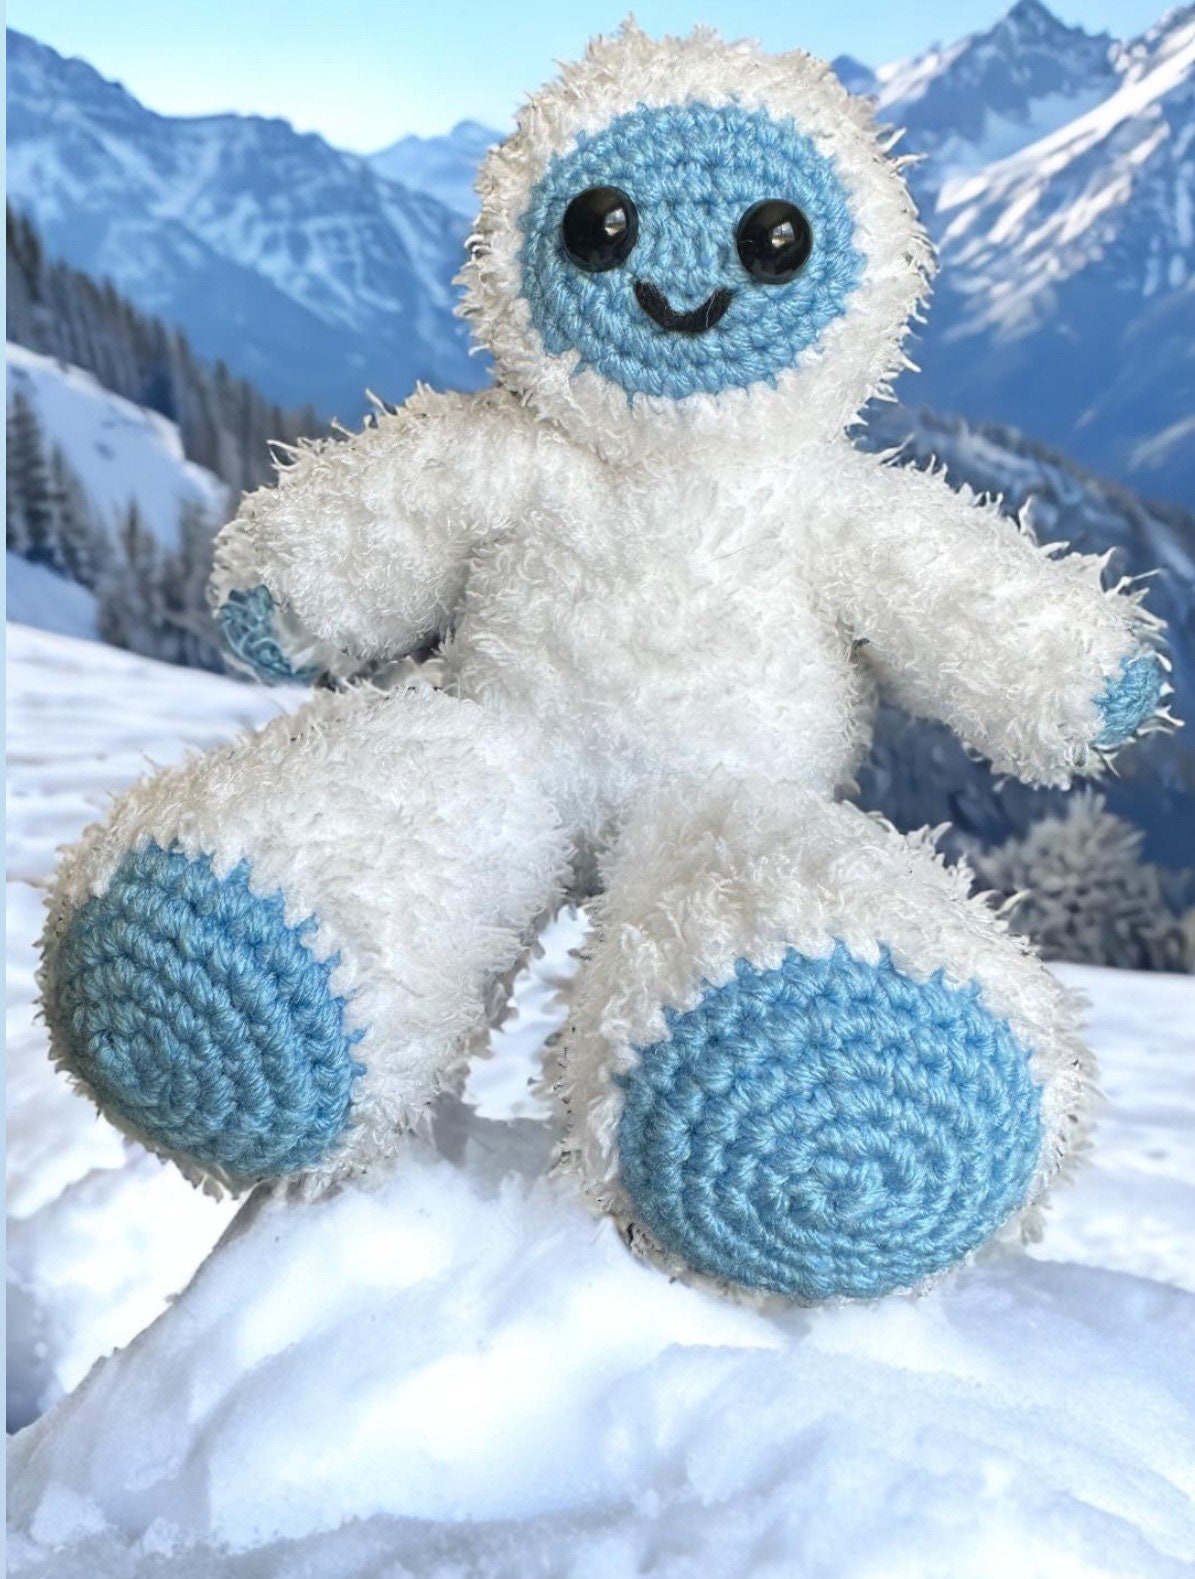 Abominable - Everest The Young Yeti Peluche 40cm